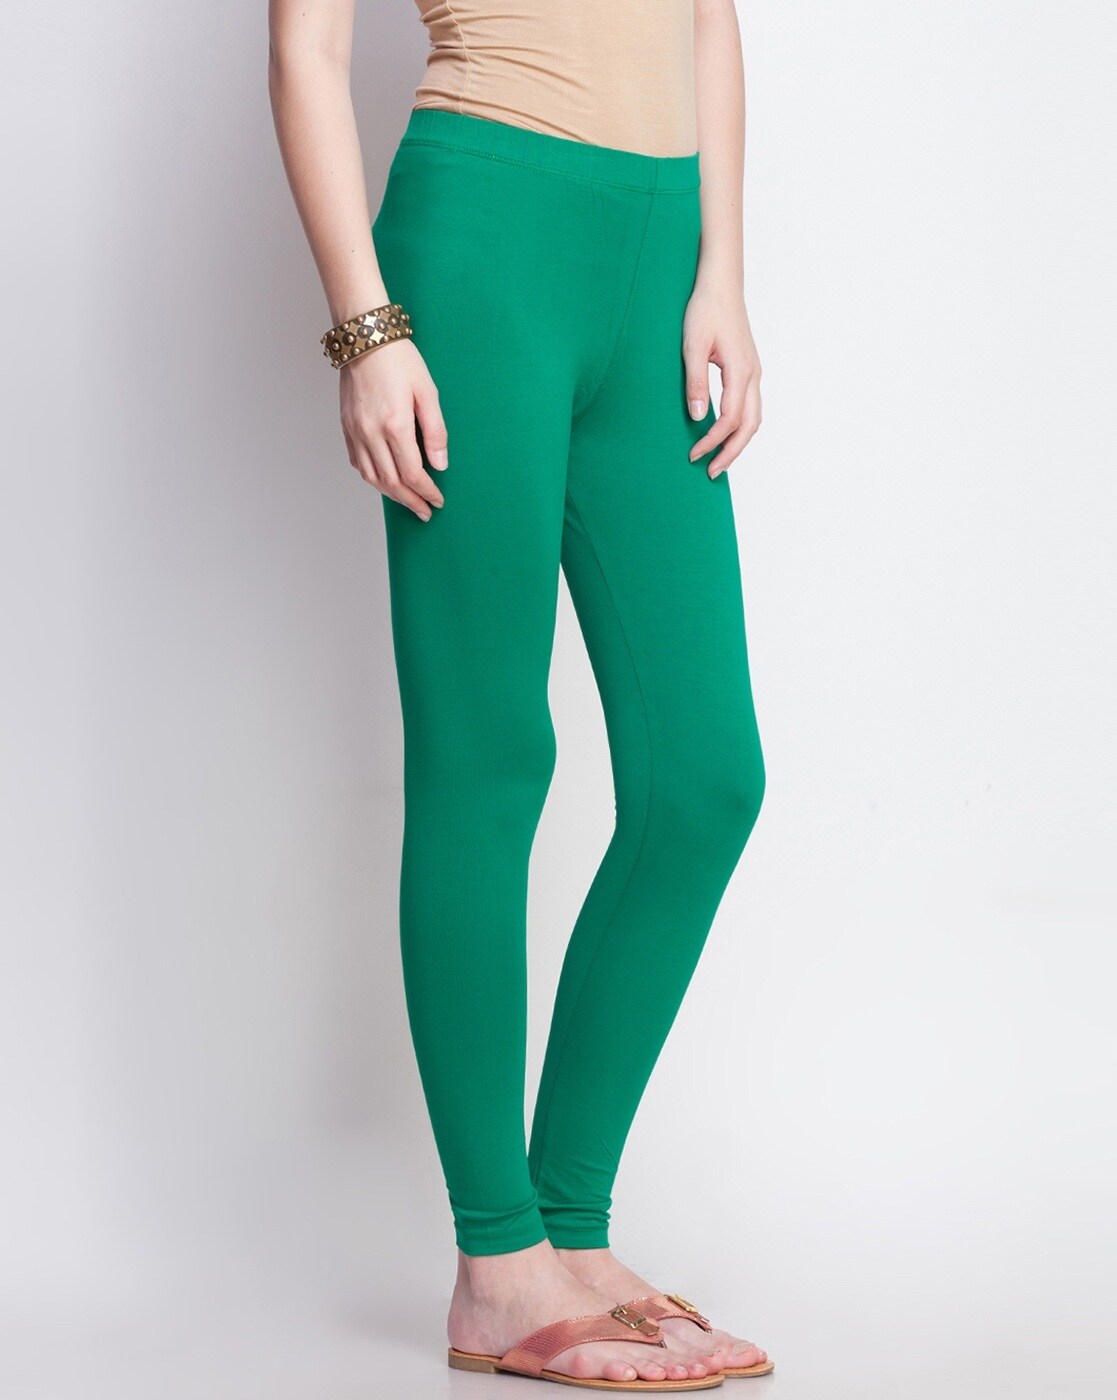 Jumpsuits & Co-ords | Combo Women Top And Leggings | Freeup